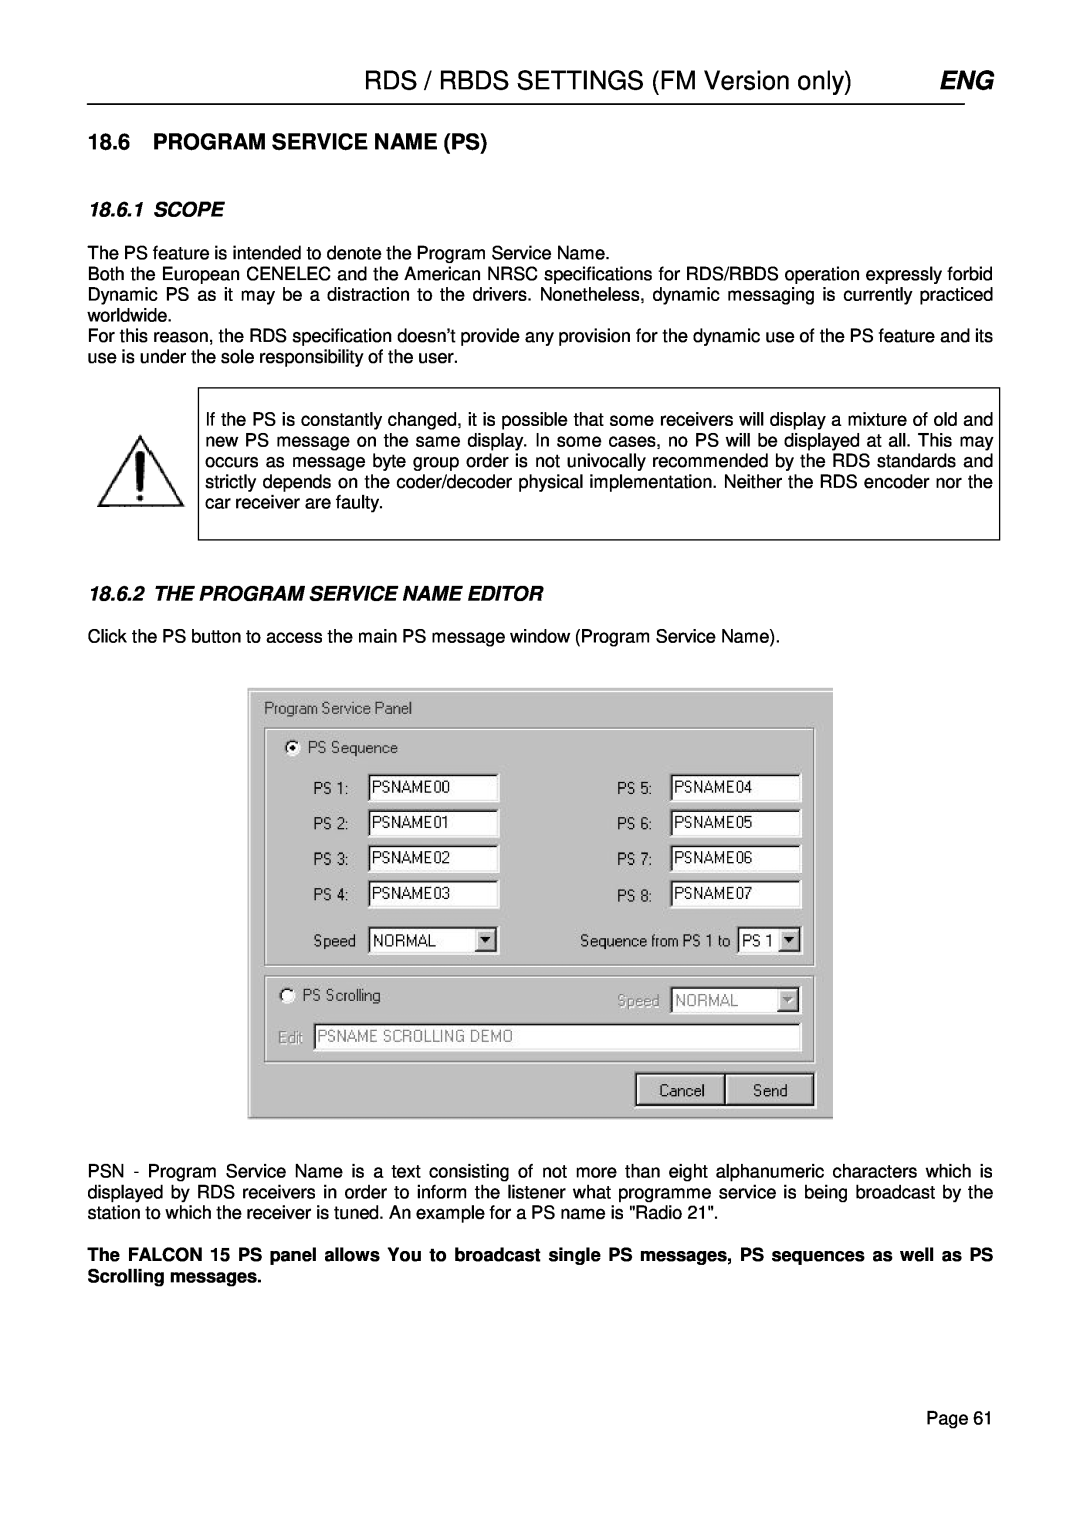 Falcon 15 manual RDS / RBDS SETTINGS FM Version only, 18.6PROGRAM SERVICE NAME PS, Scope, The Program Service Name Editor 